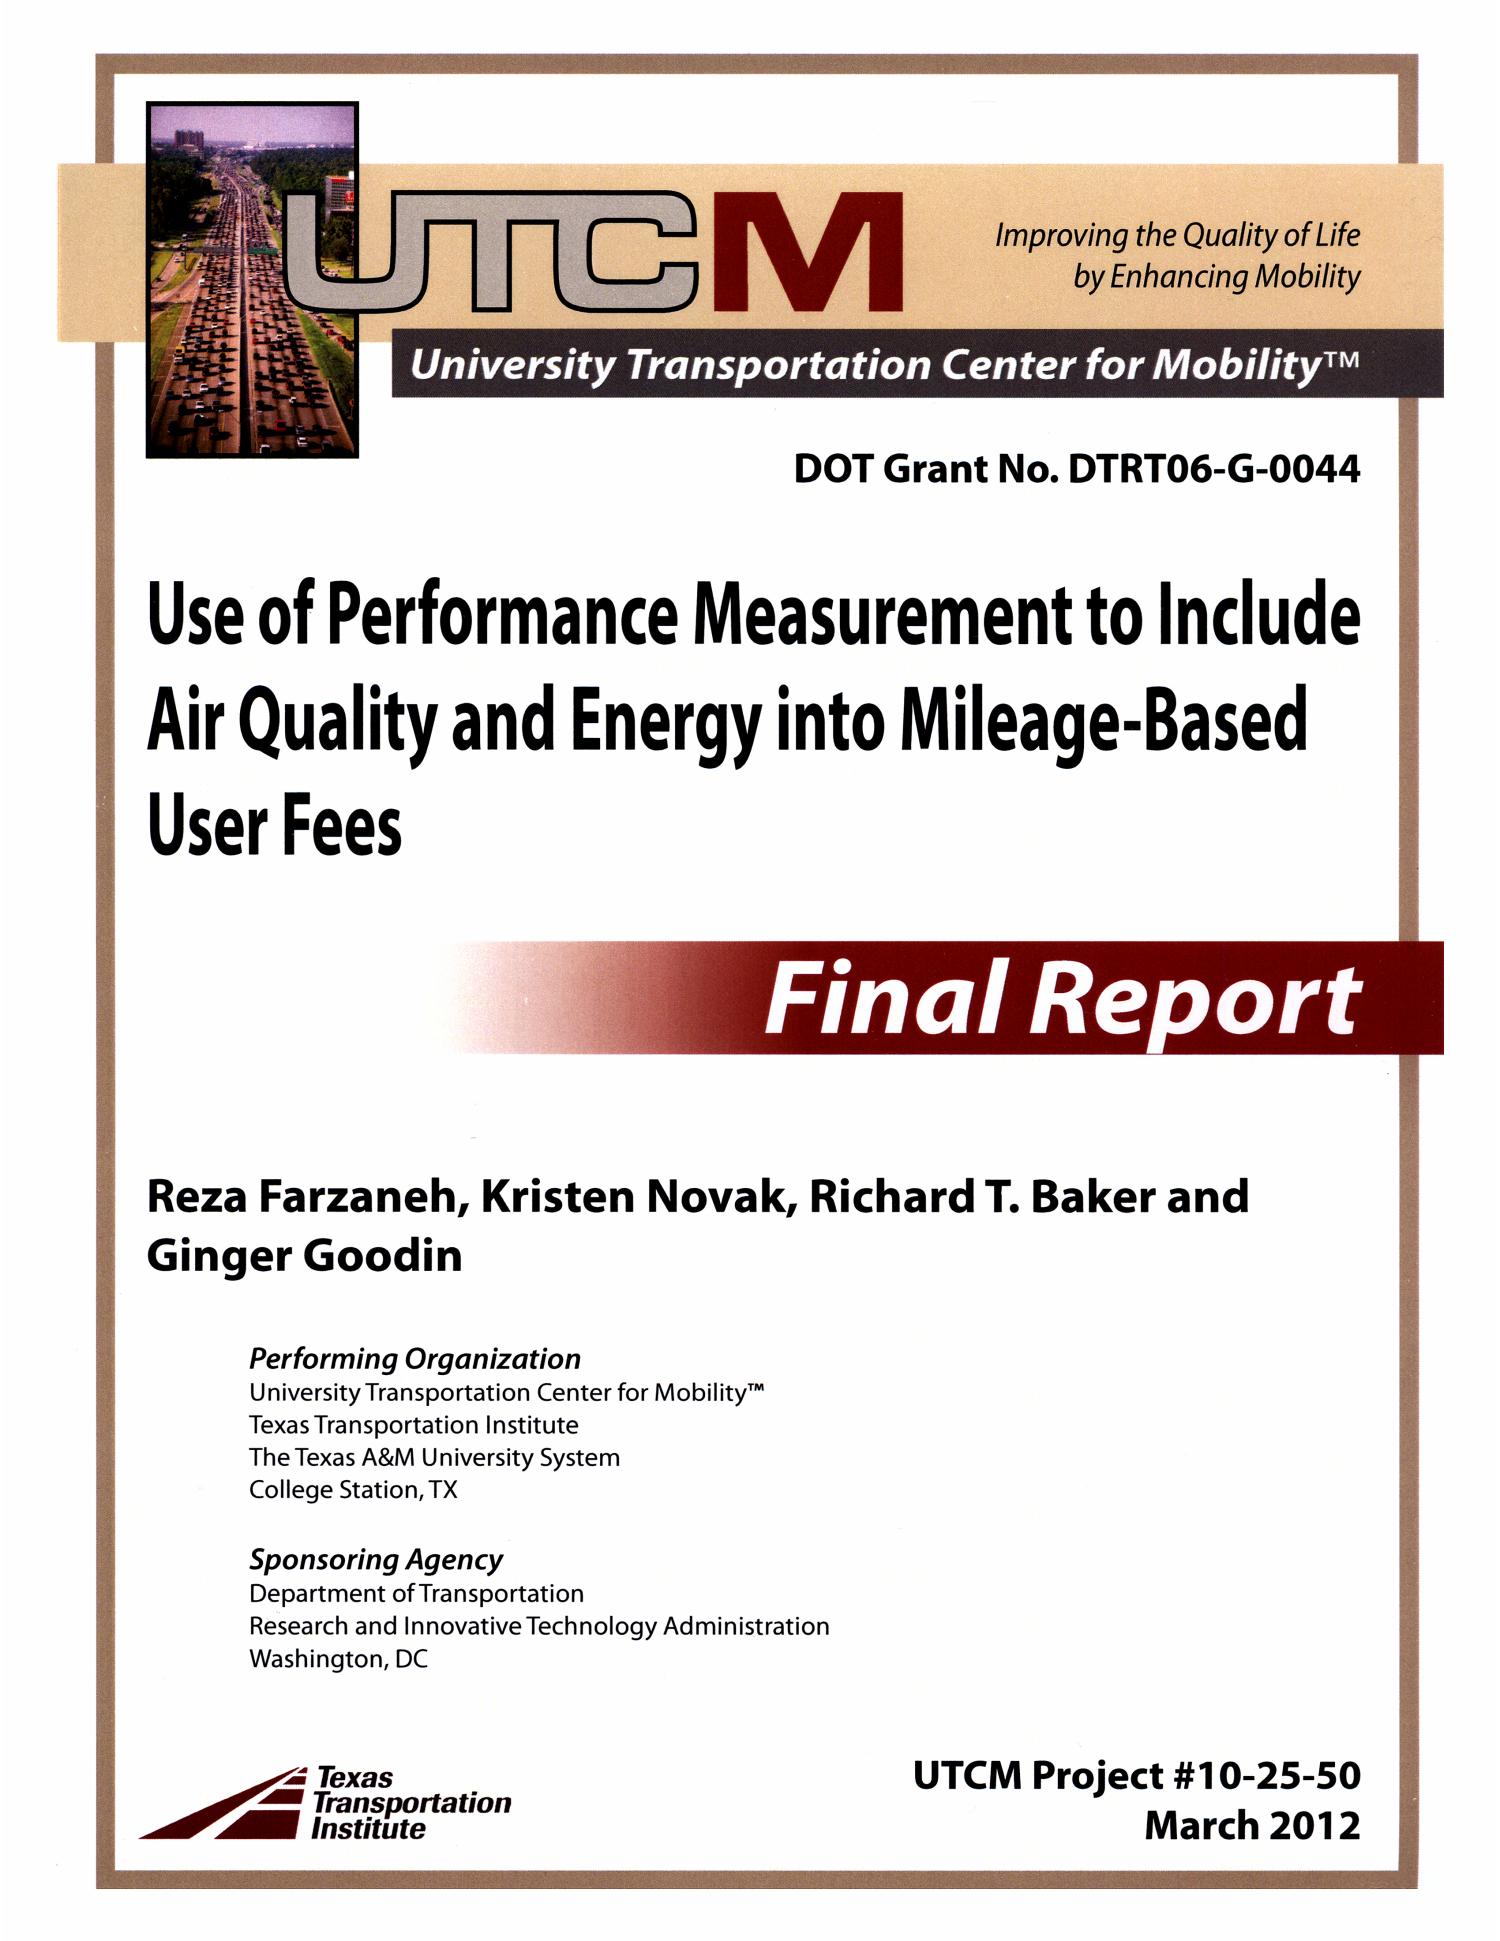 Use of Performance Measurement to Include Air Quality and Energy Into Mileage-Based User Fees
                                                
                                                    Front Cover
                                                